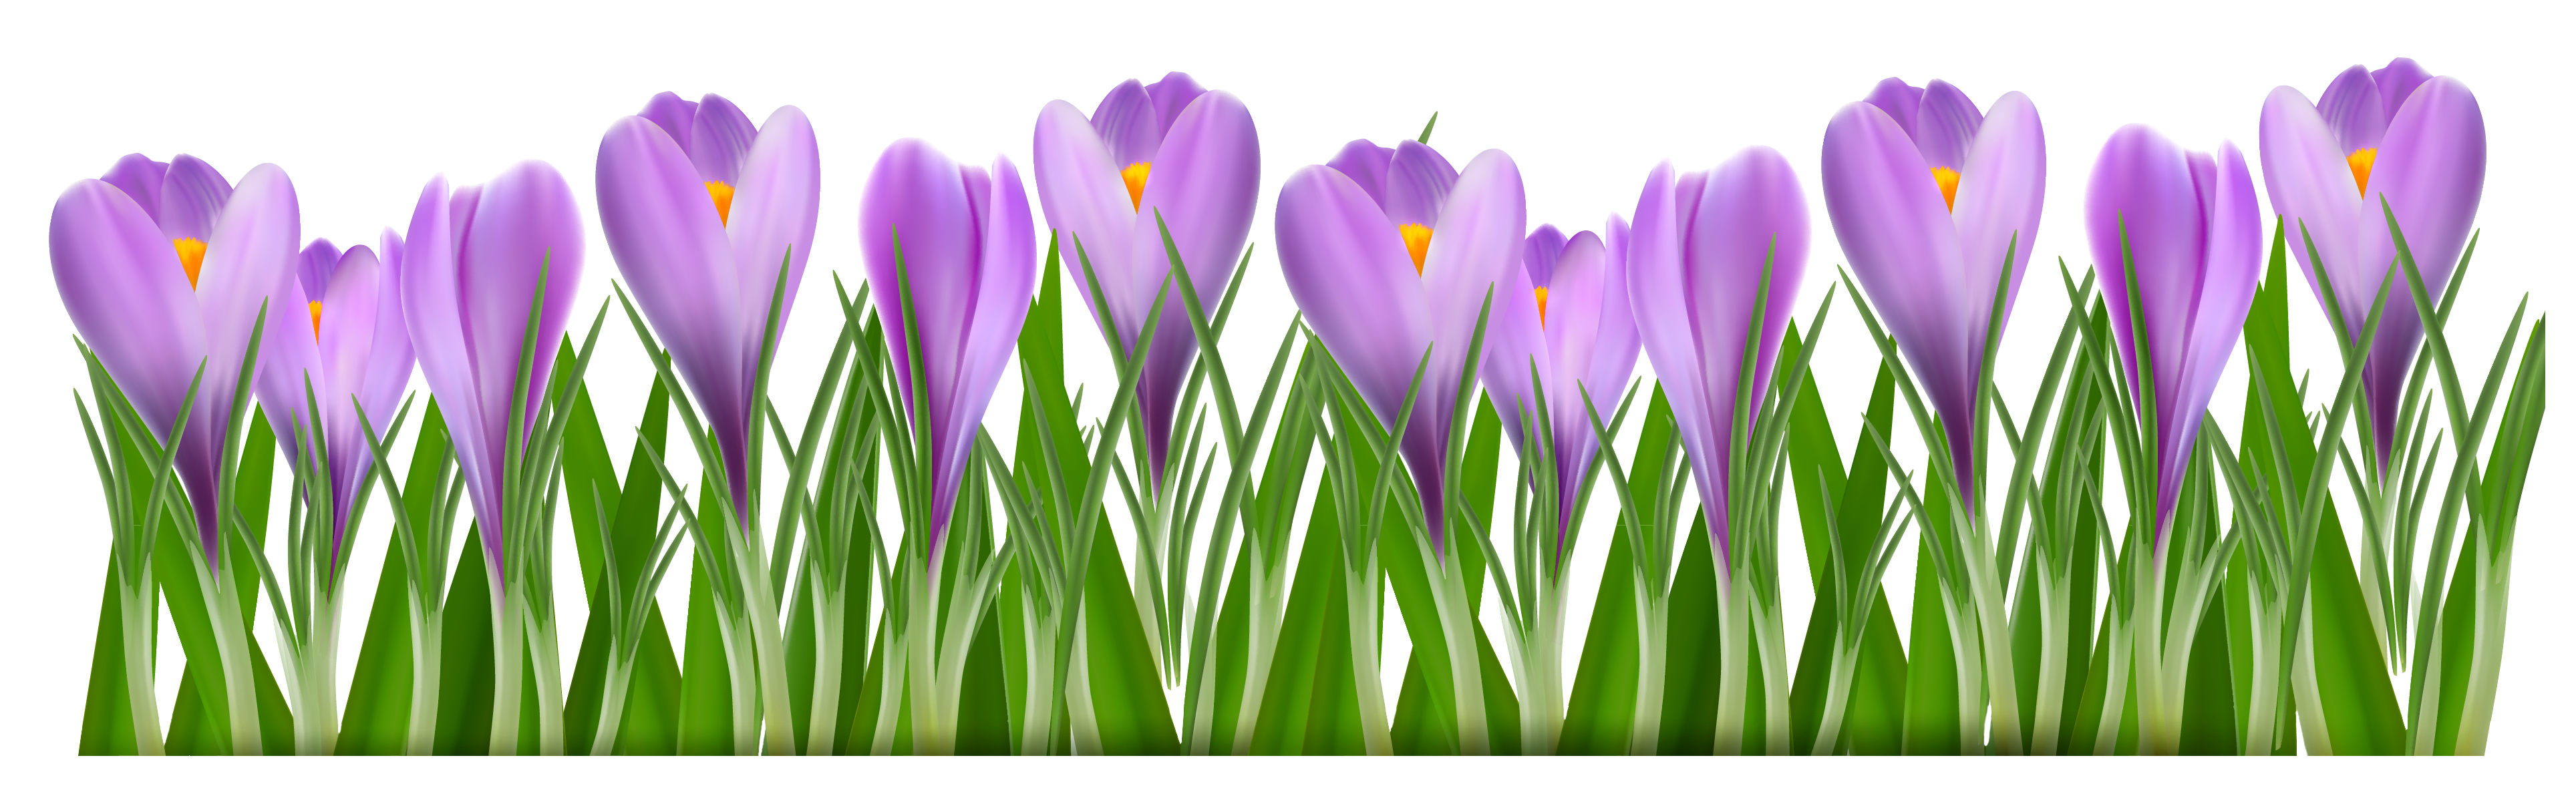 Grass with Crocus PNG Clipart Picture